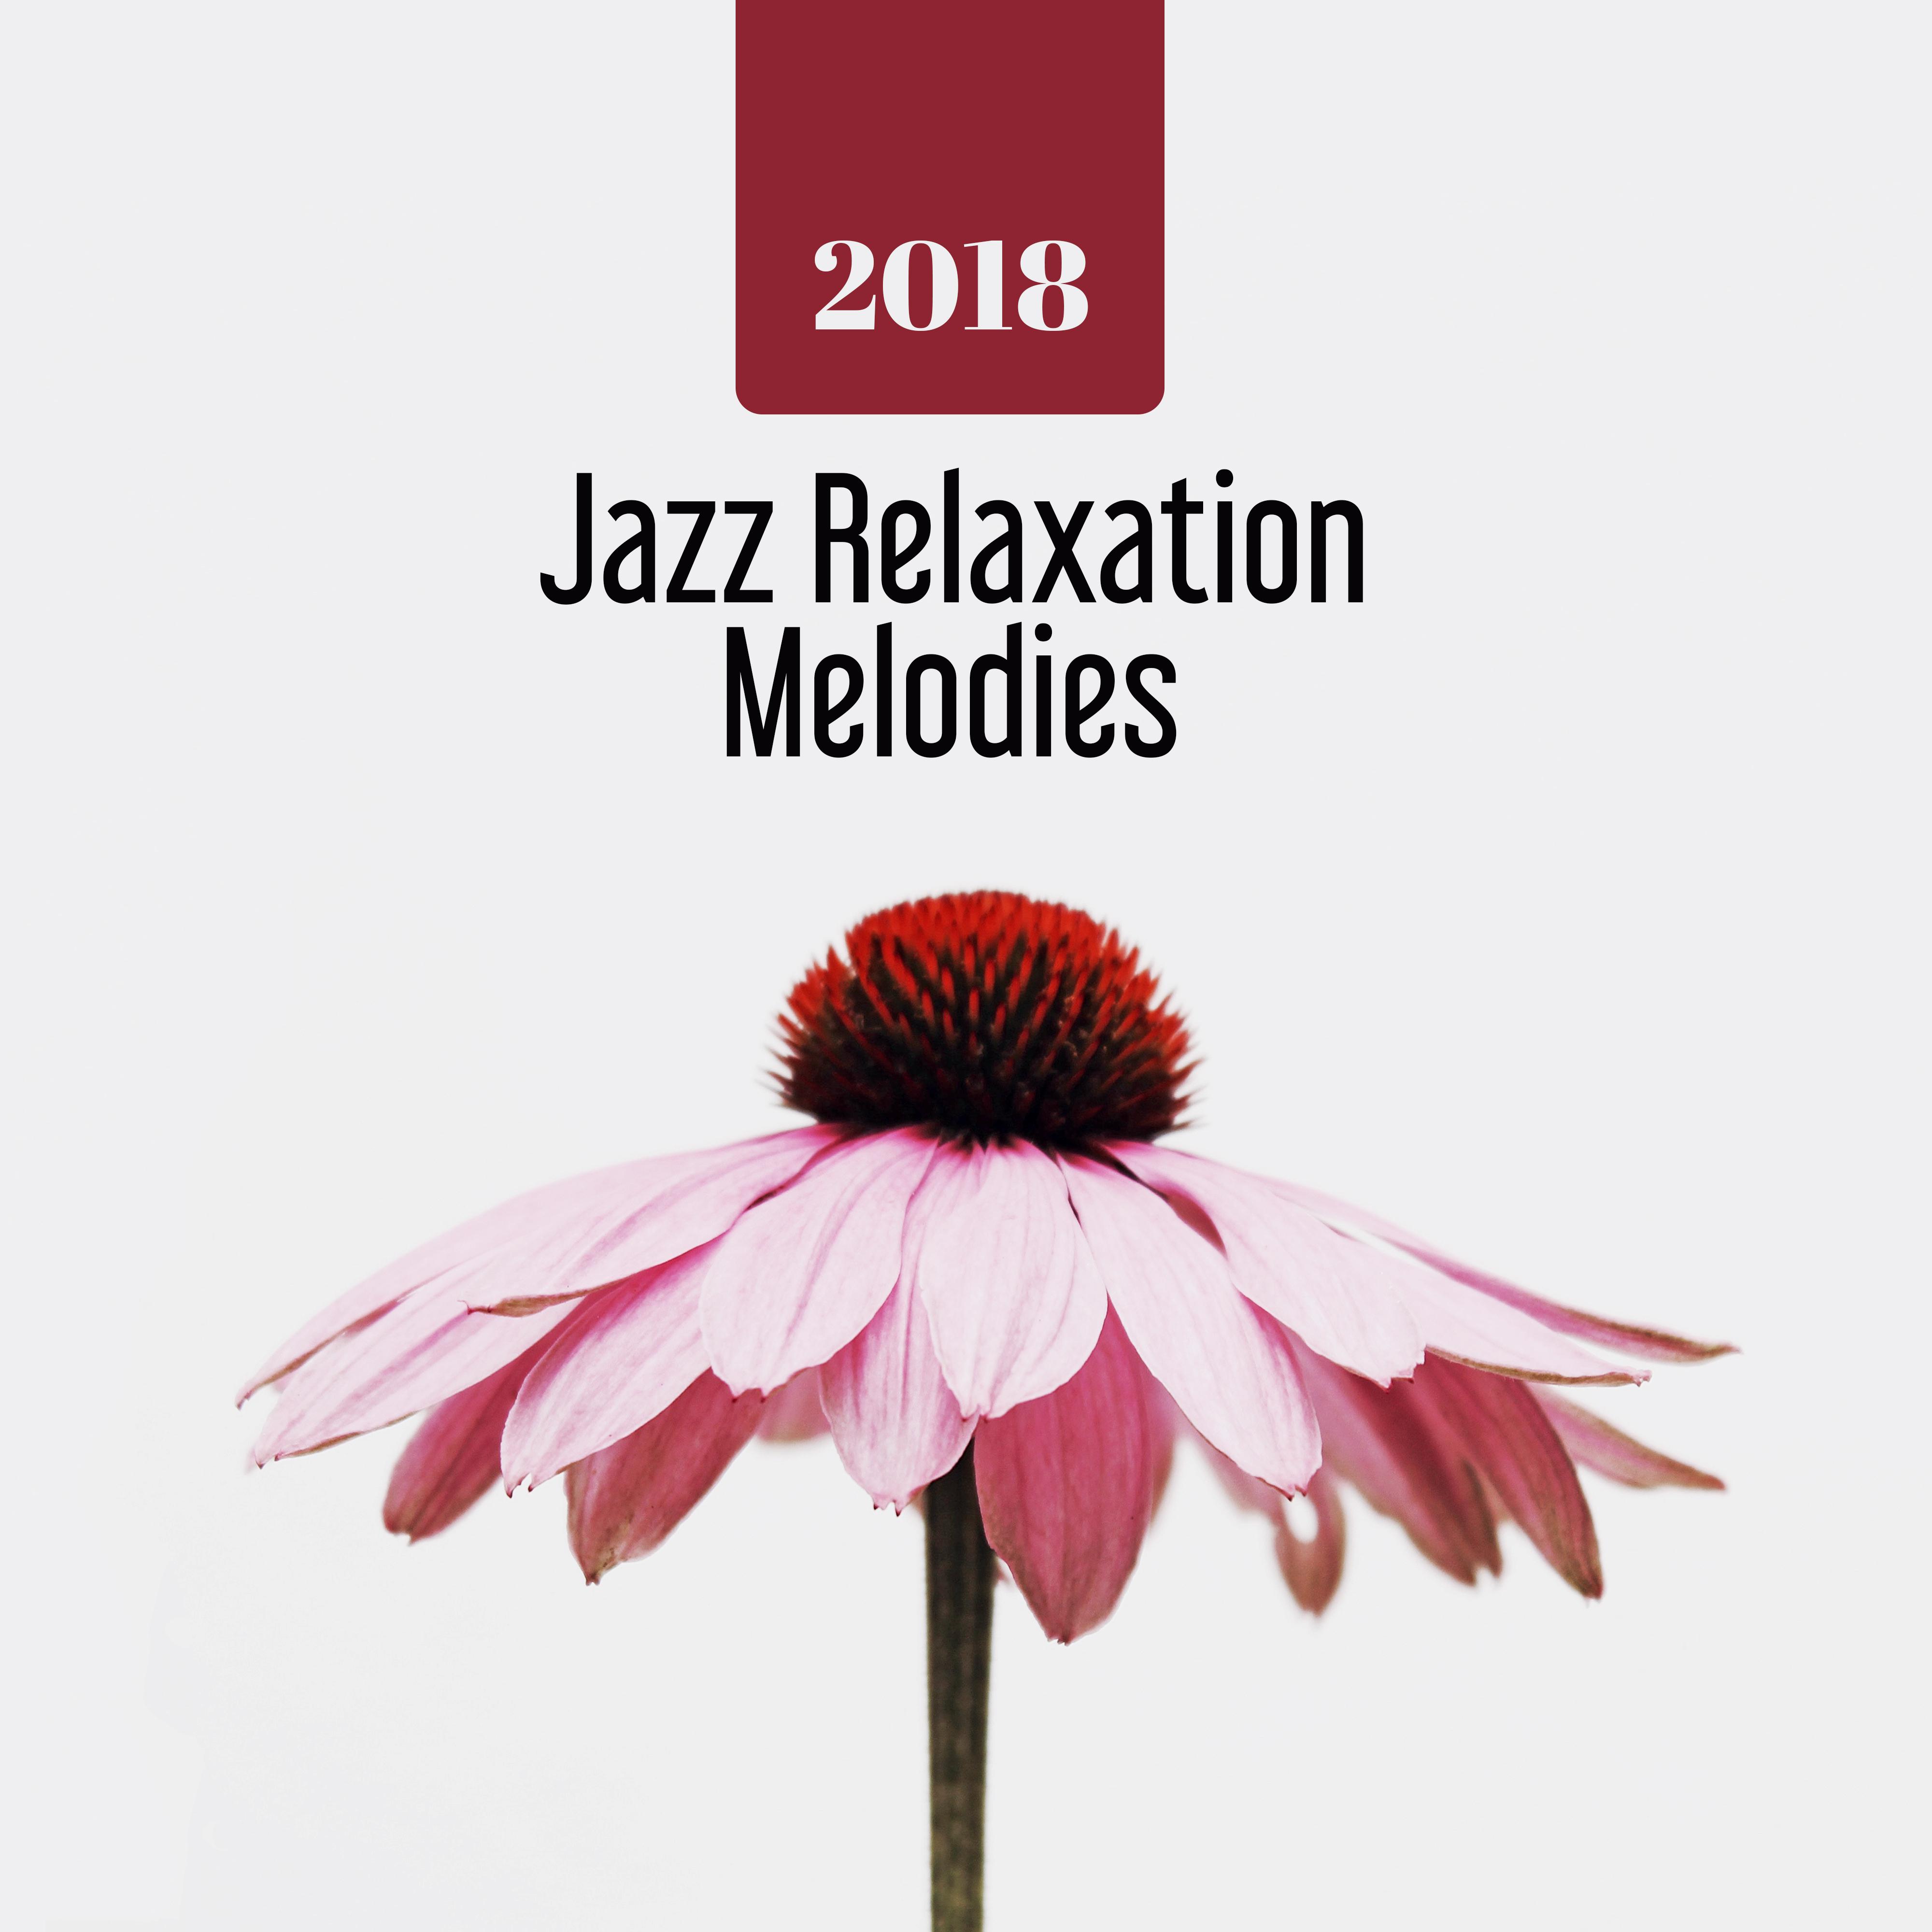 2018 Jazz Relaxation Melodies